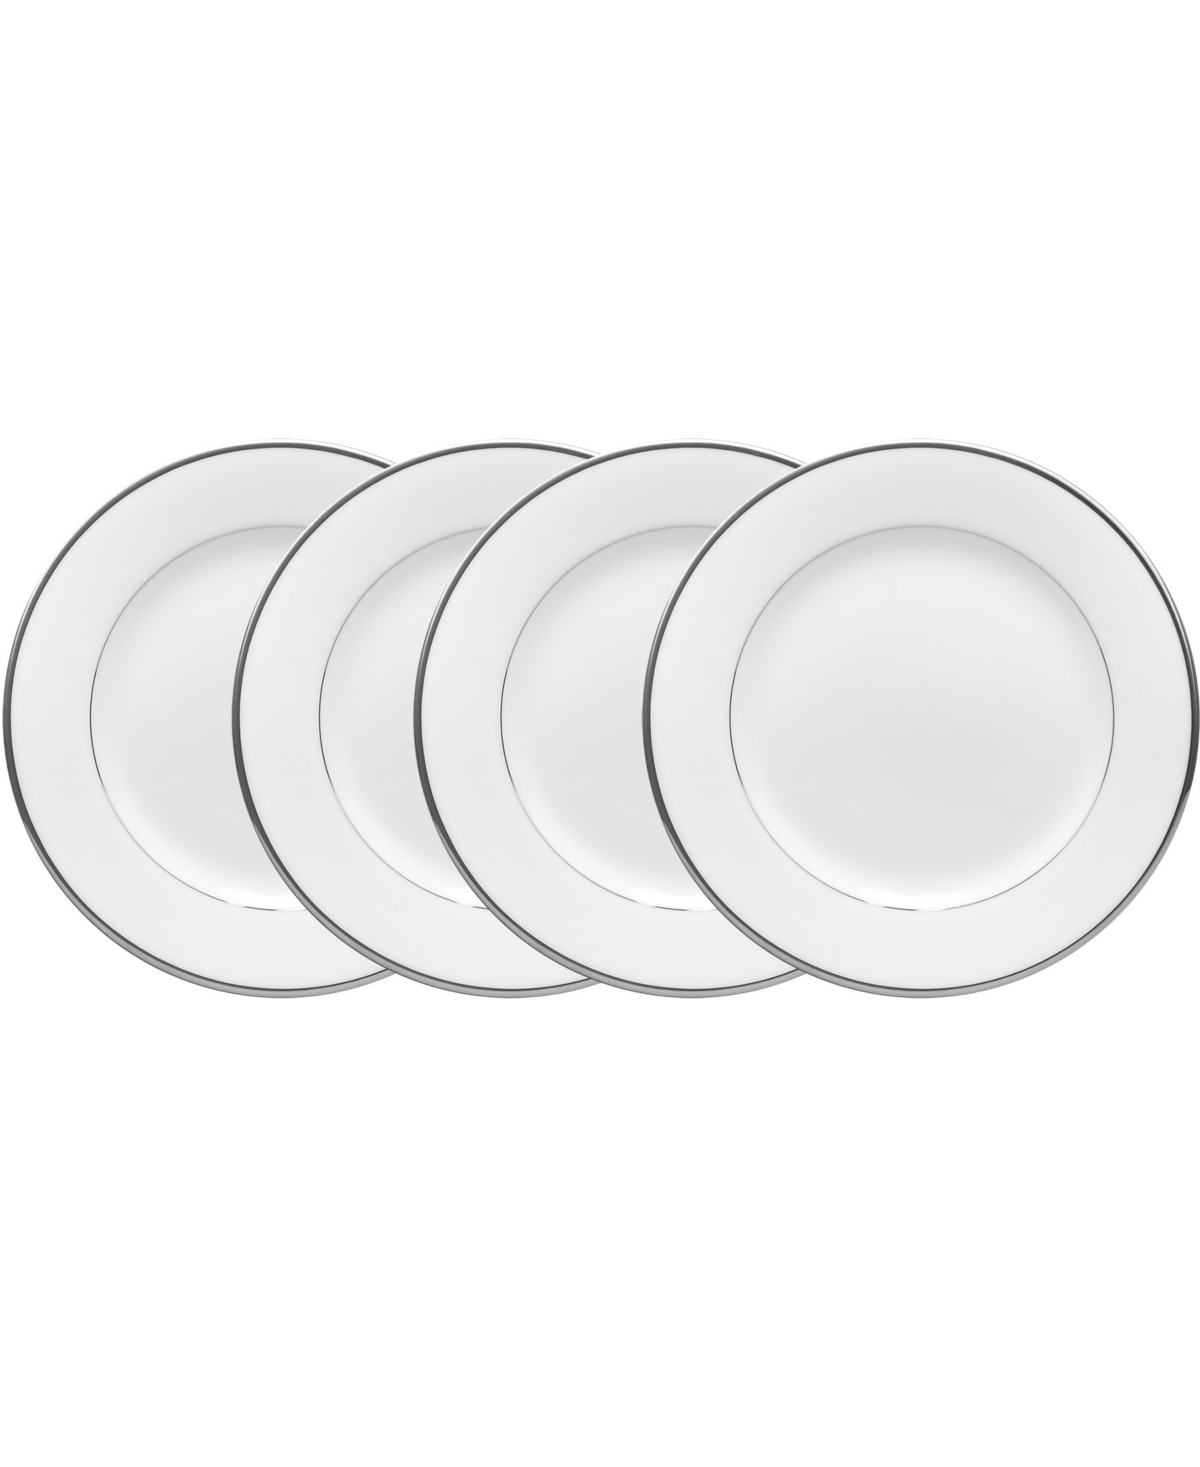 Noritake Spectrum Set Of 4 Bread Butter And Appetizer Plates, Service For 4 In White